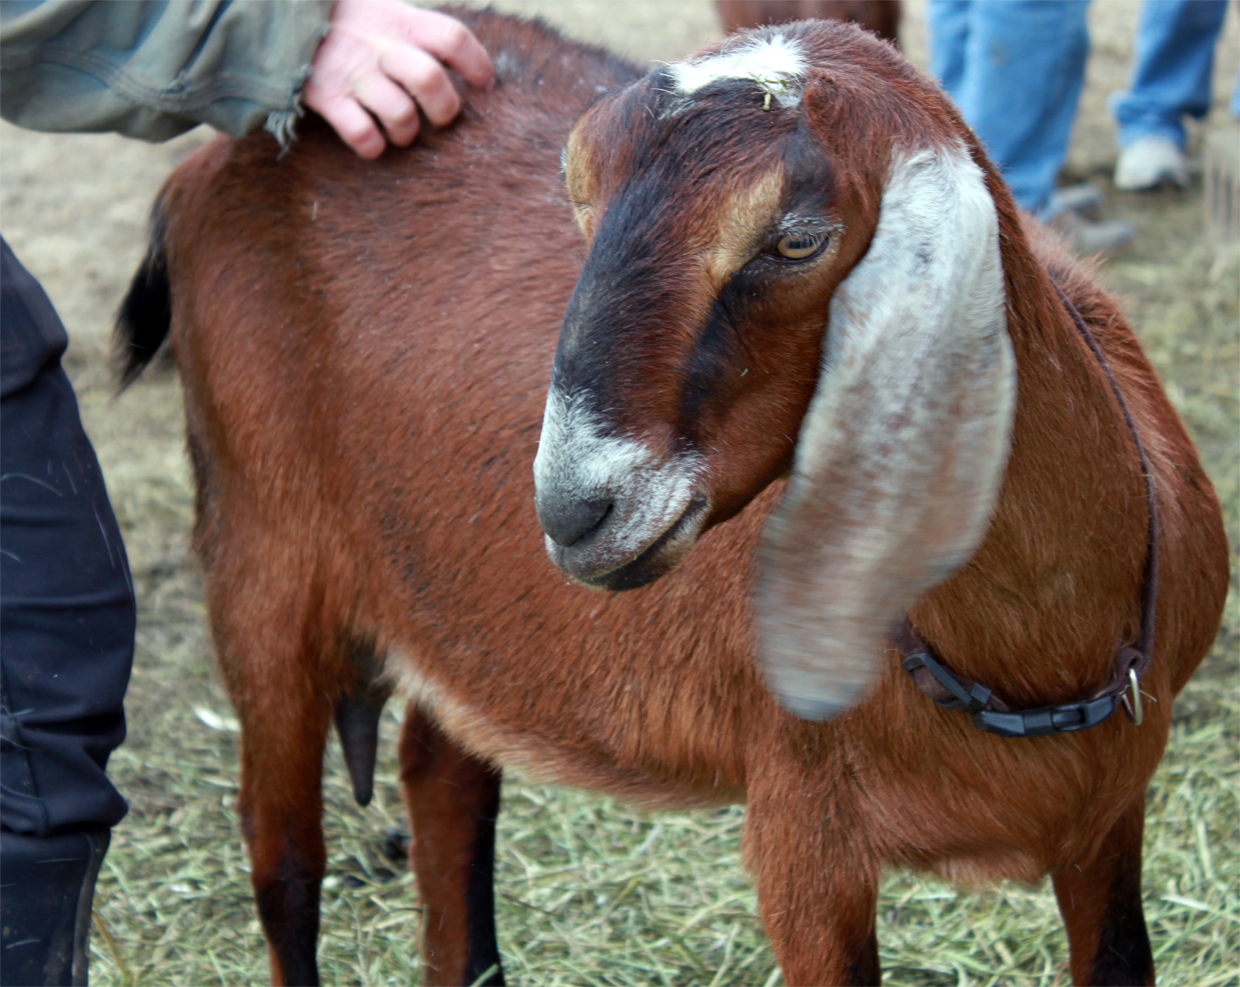 Honey Creek Creamery sells premium chèvre goat cheese to restaurants, farmers markets, specialty stores and as an Add-on CSA share at Iowana Farm.